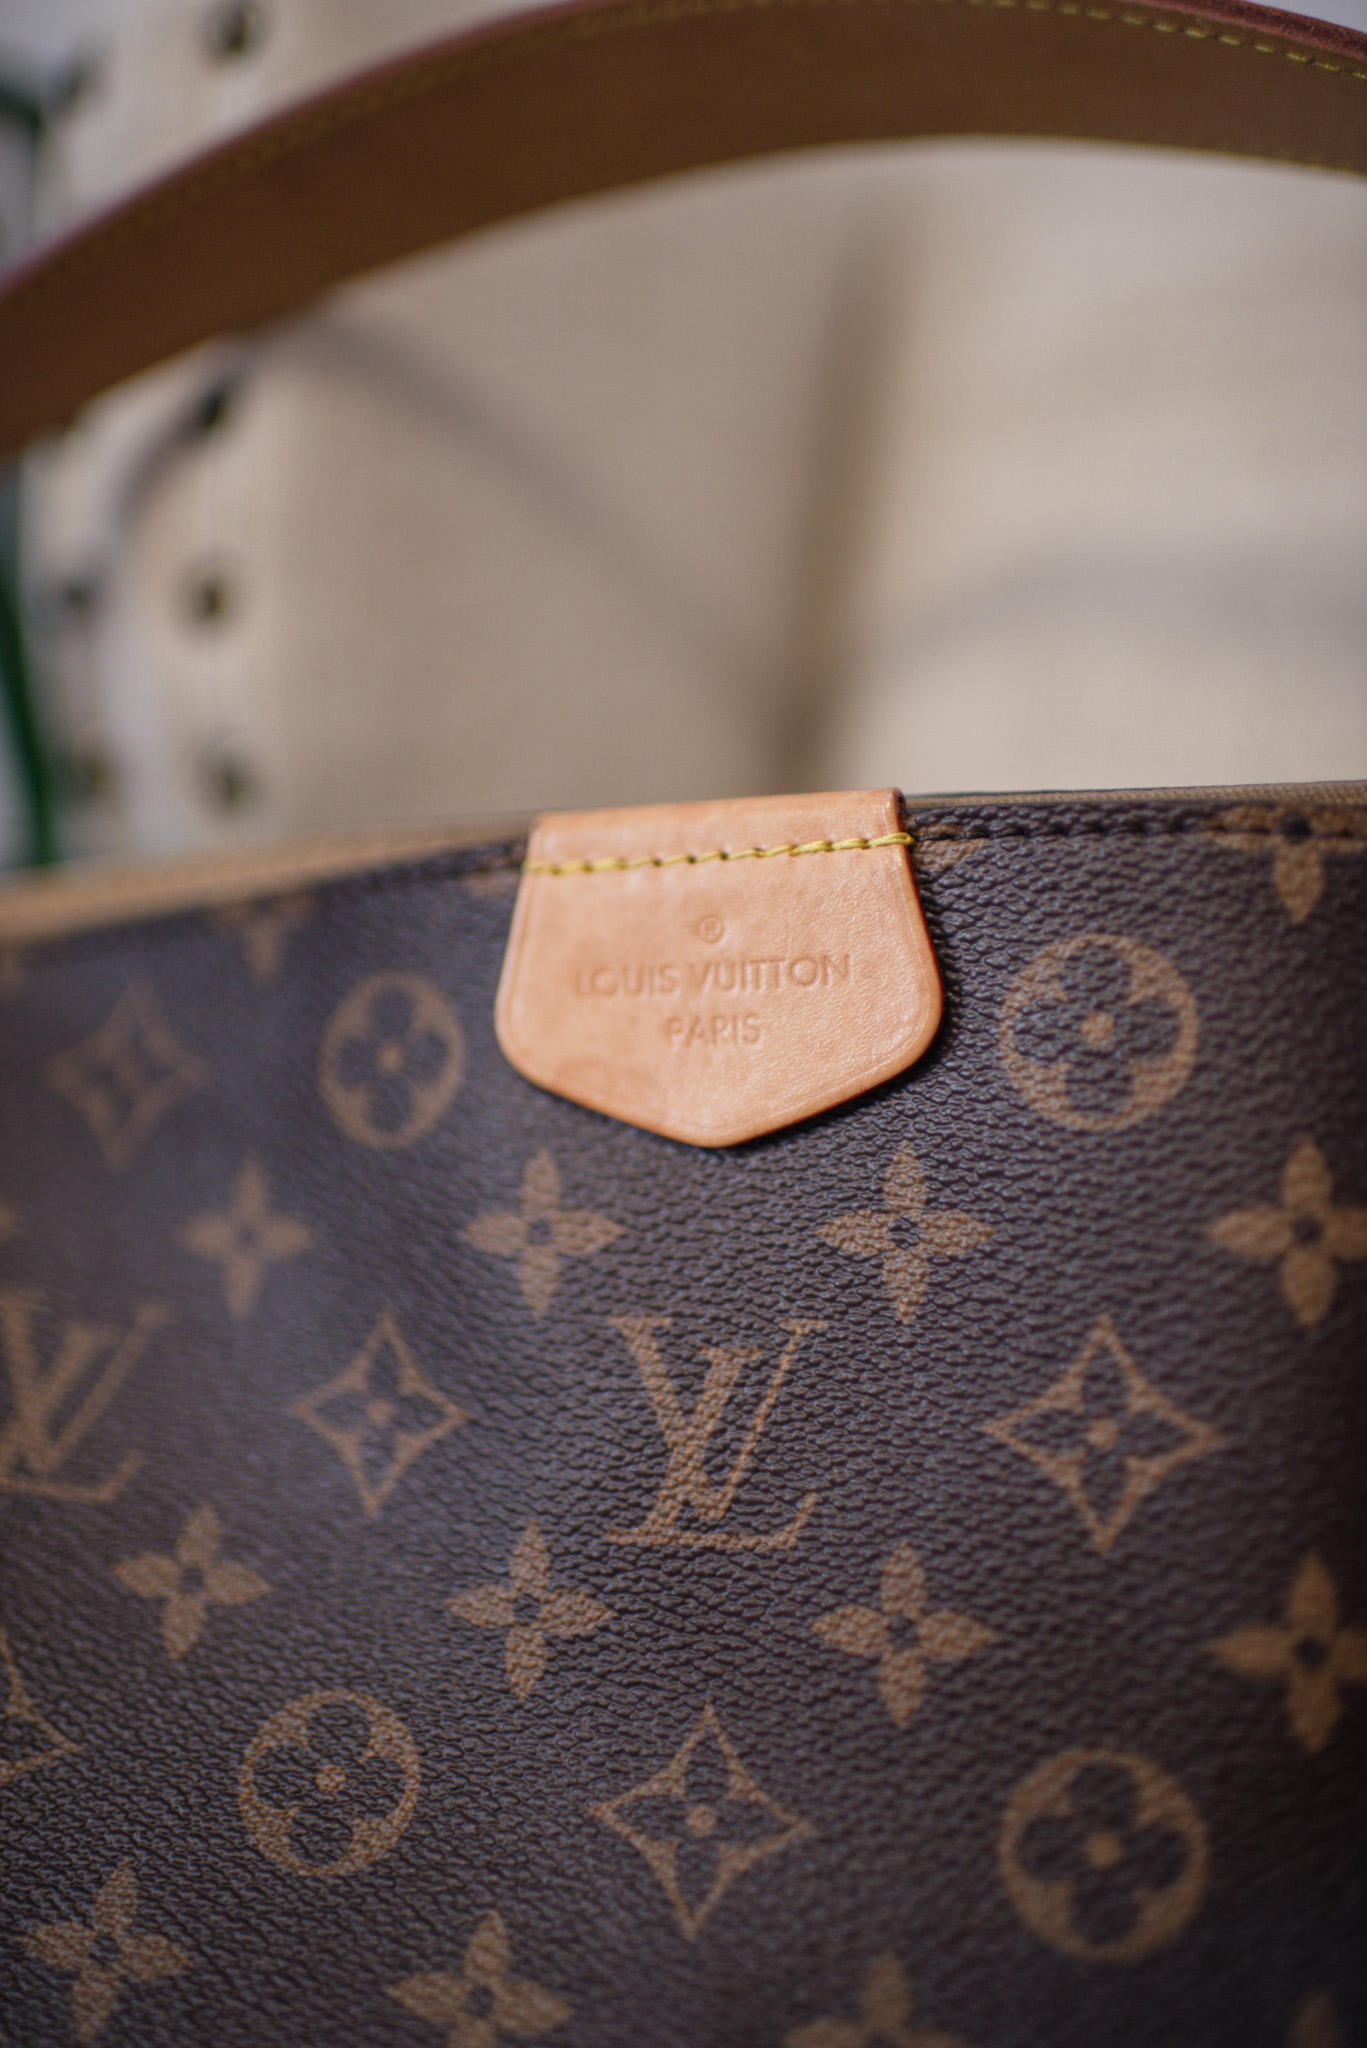 Reviewing my Louis Vuitton Graceful MM 💕 My latest bag in my